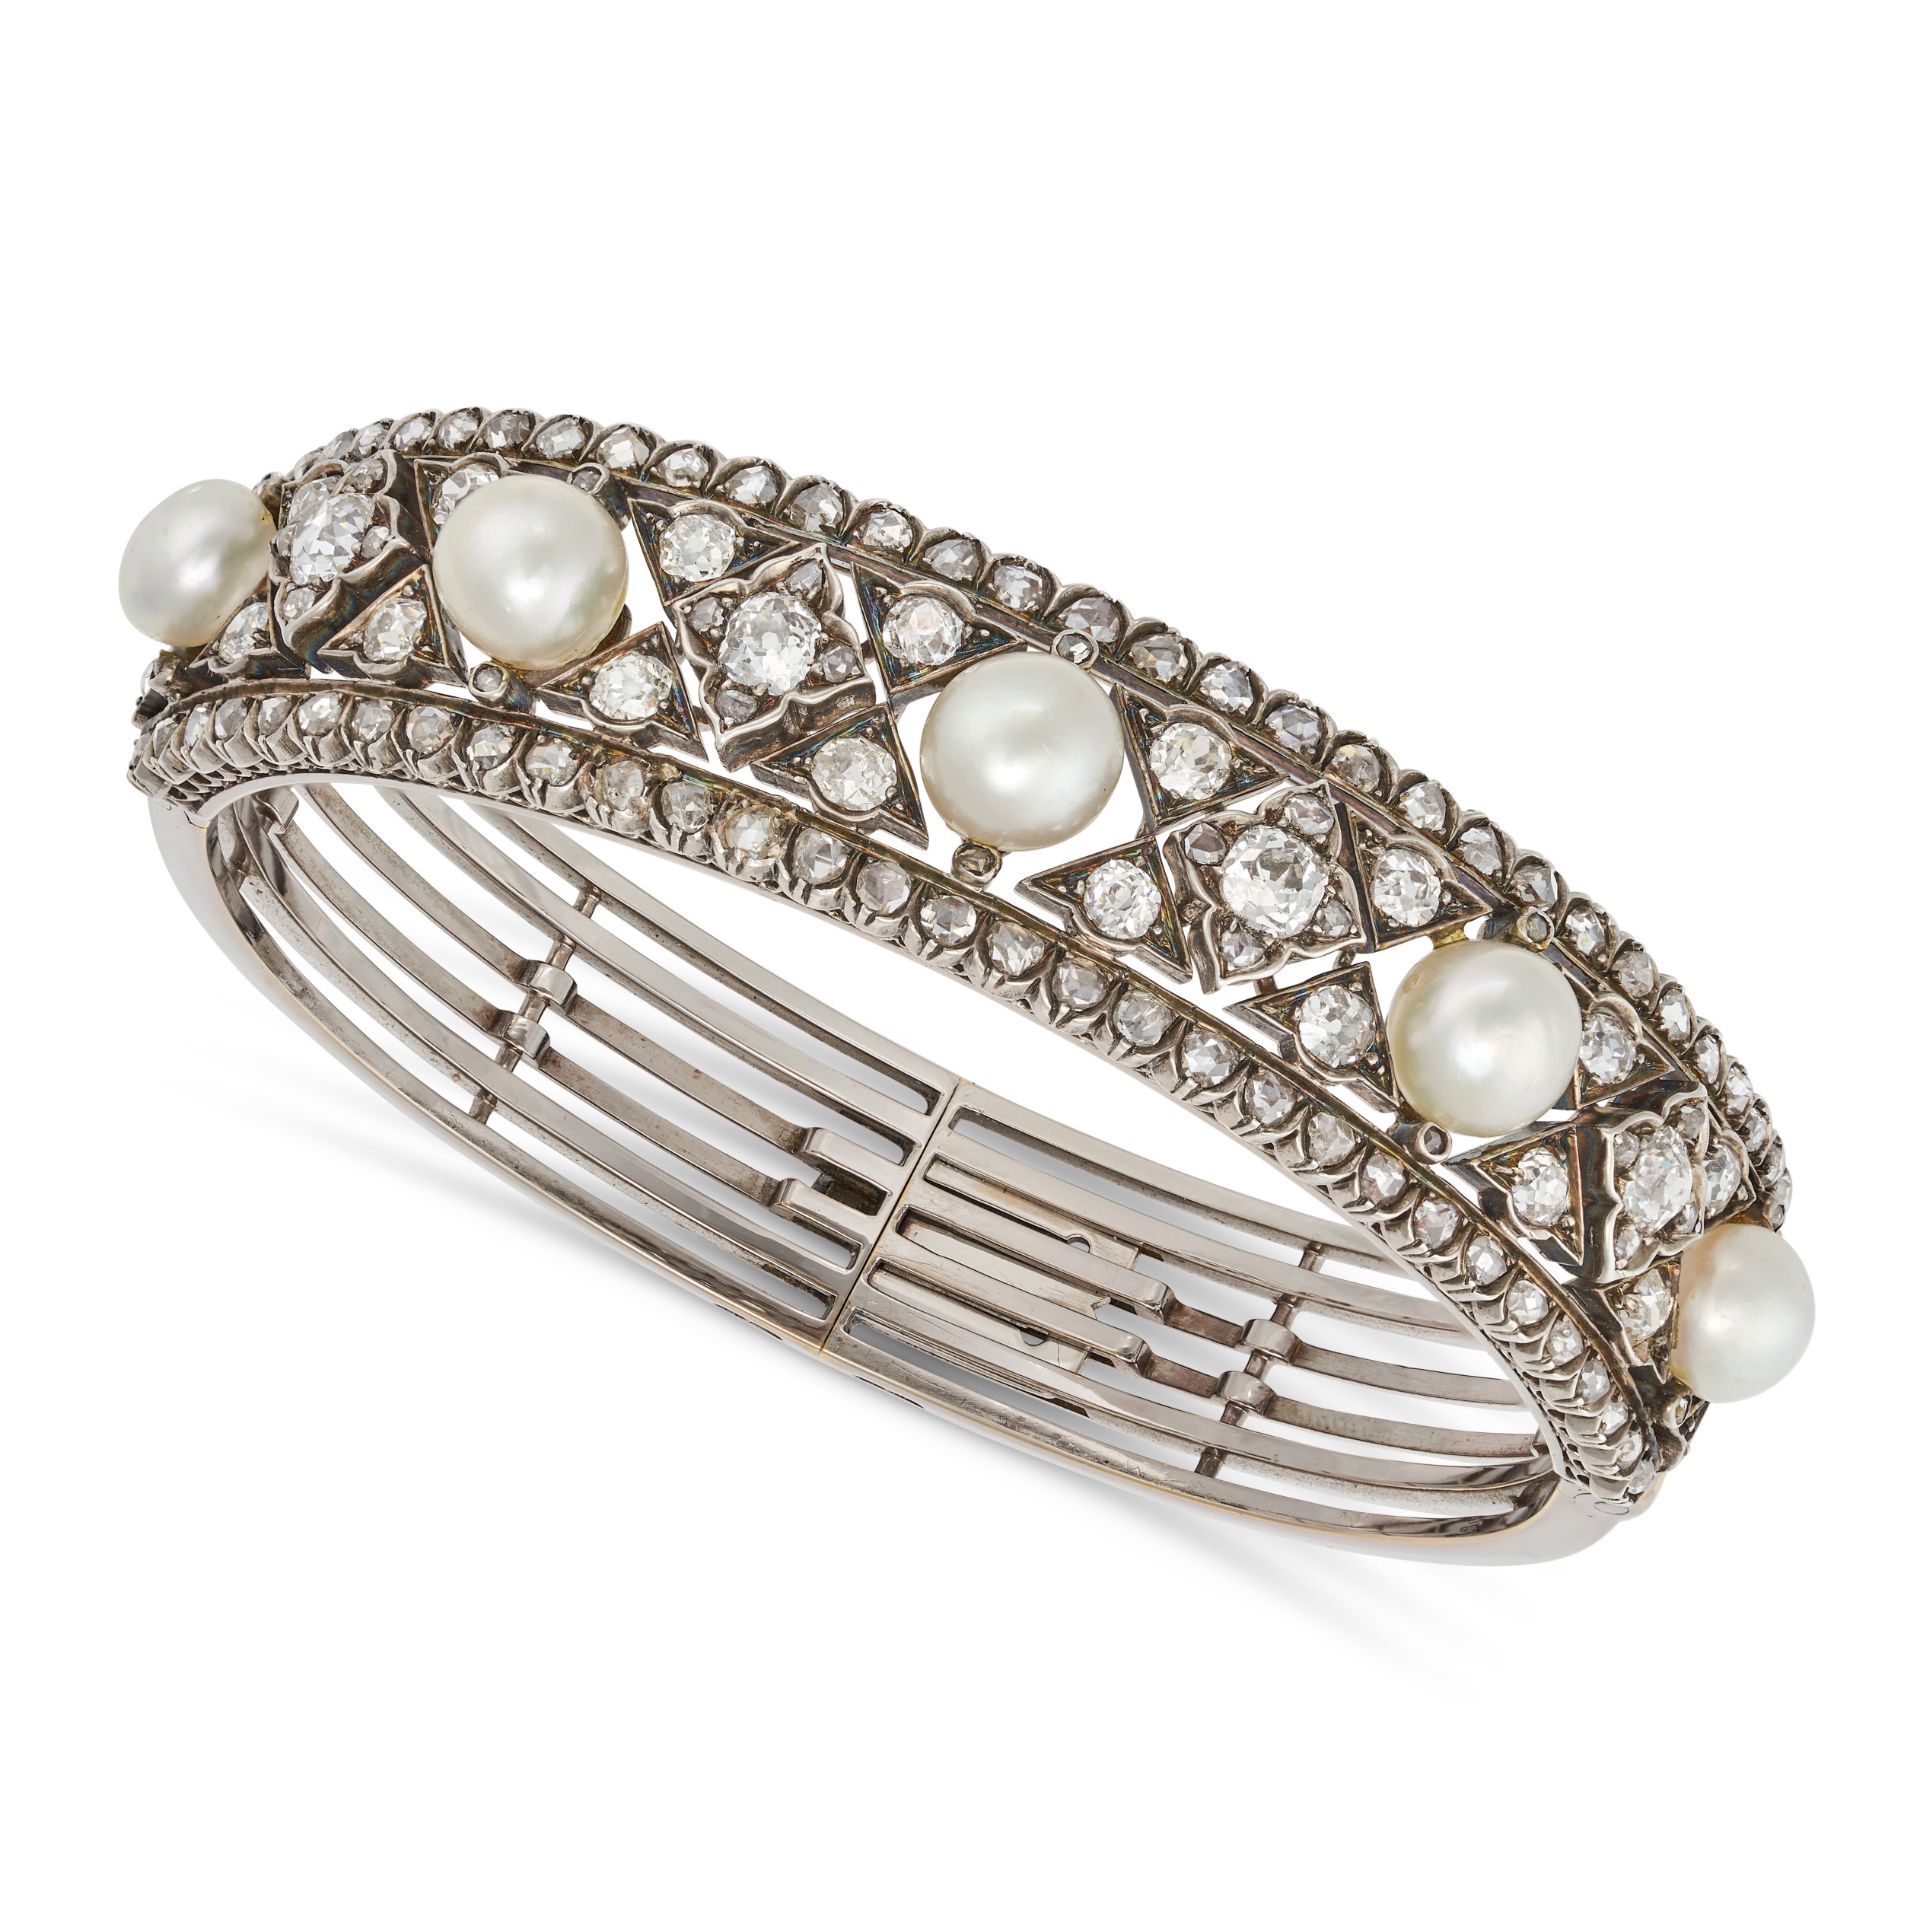 AN ANTIQUE PEARL AND DIAMOND BANGLE set with a row of alternating pearls and quatrefoil motifs se...